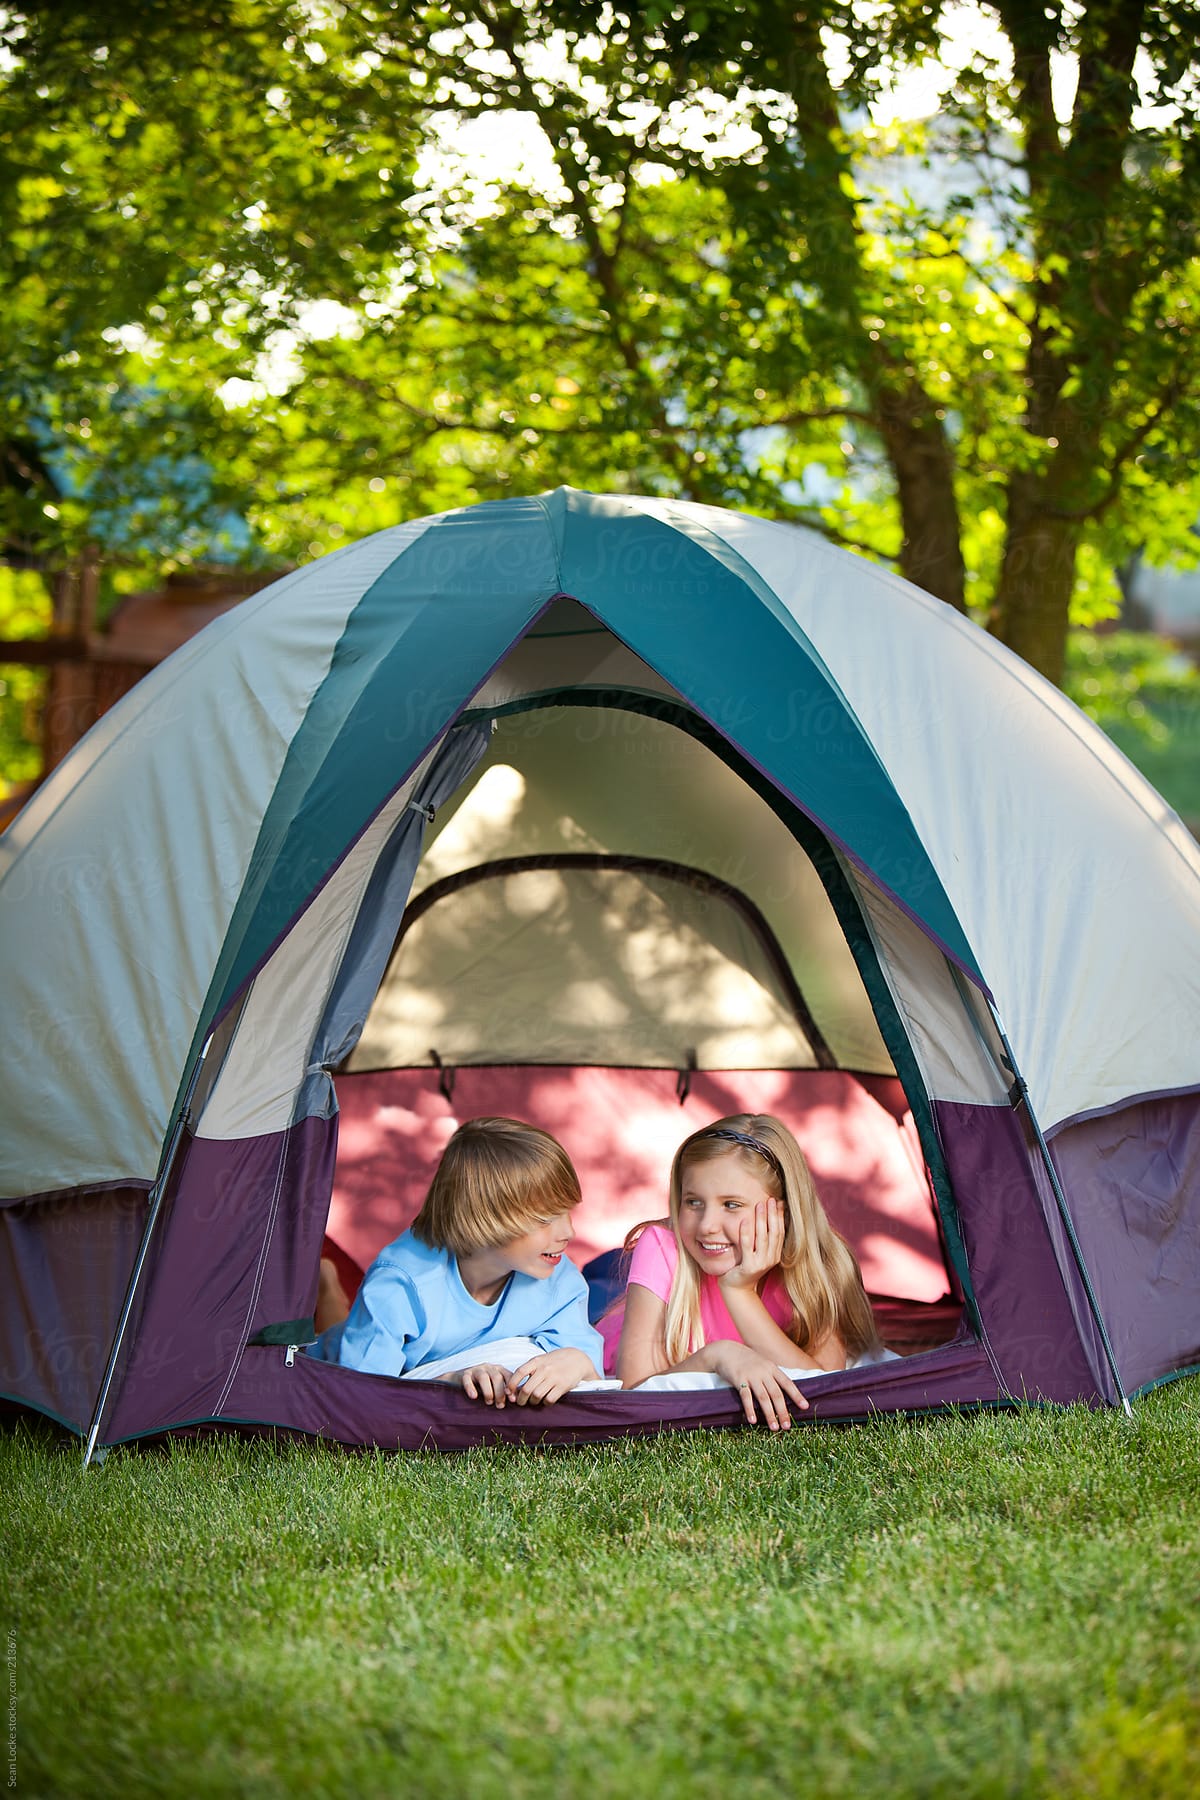 Camping: Kids Hanging Out in Tent